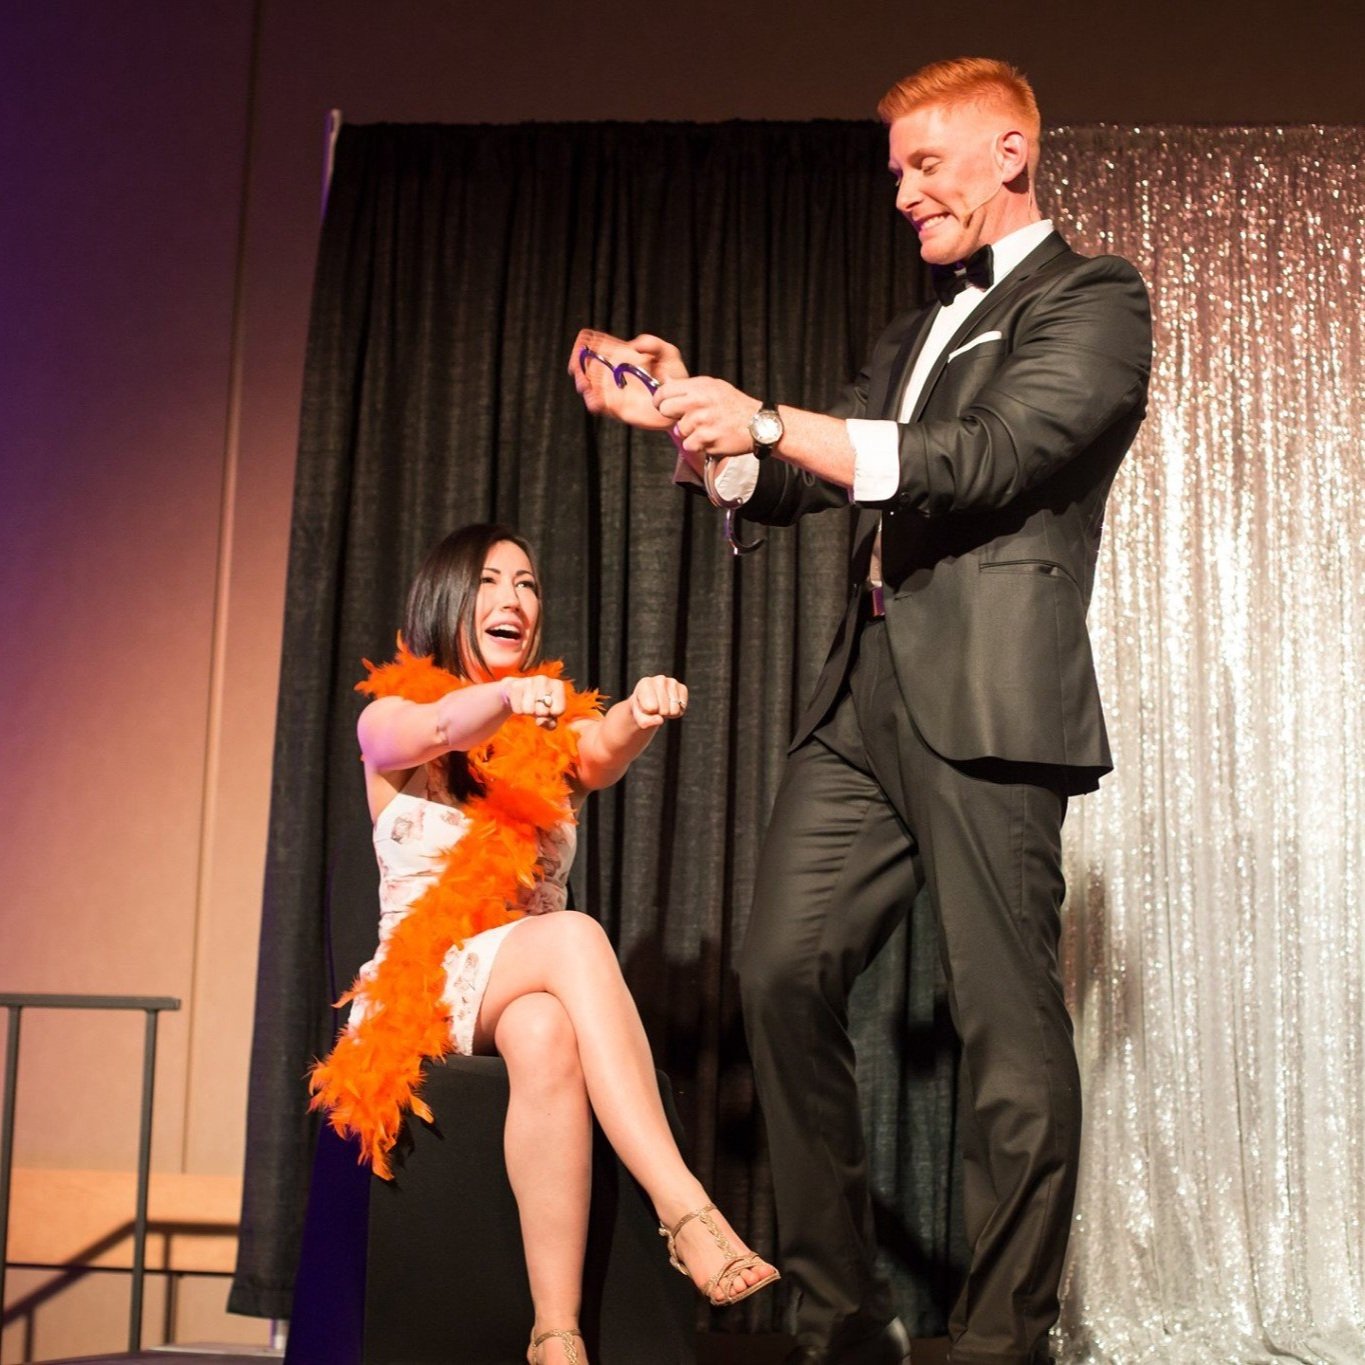  Matt Gore, a magician, is seen in a tuxedo holding a handcuff, accompanied by a woman in a black dress wearing an orange feather, holding her hands high for a magic show 